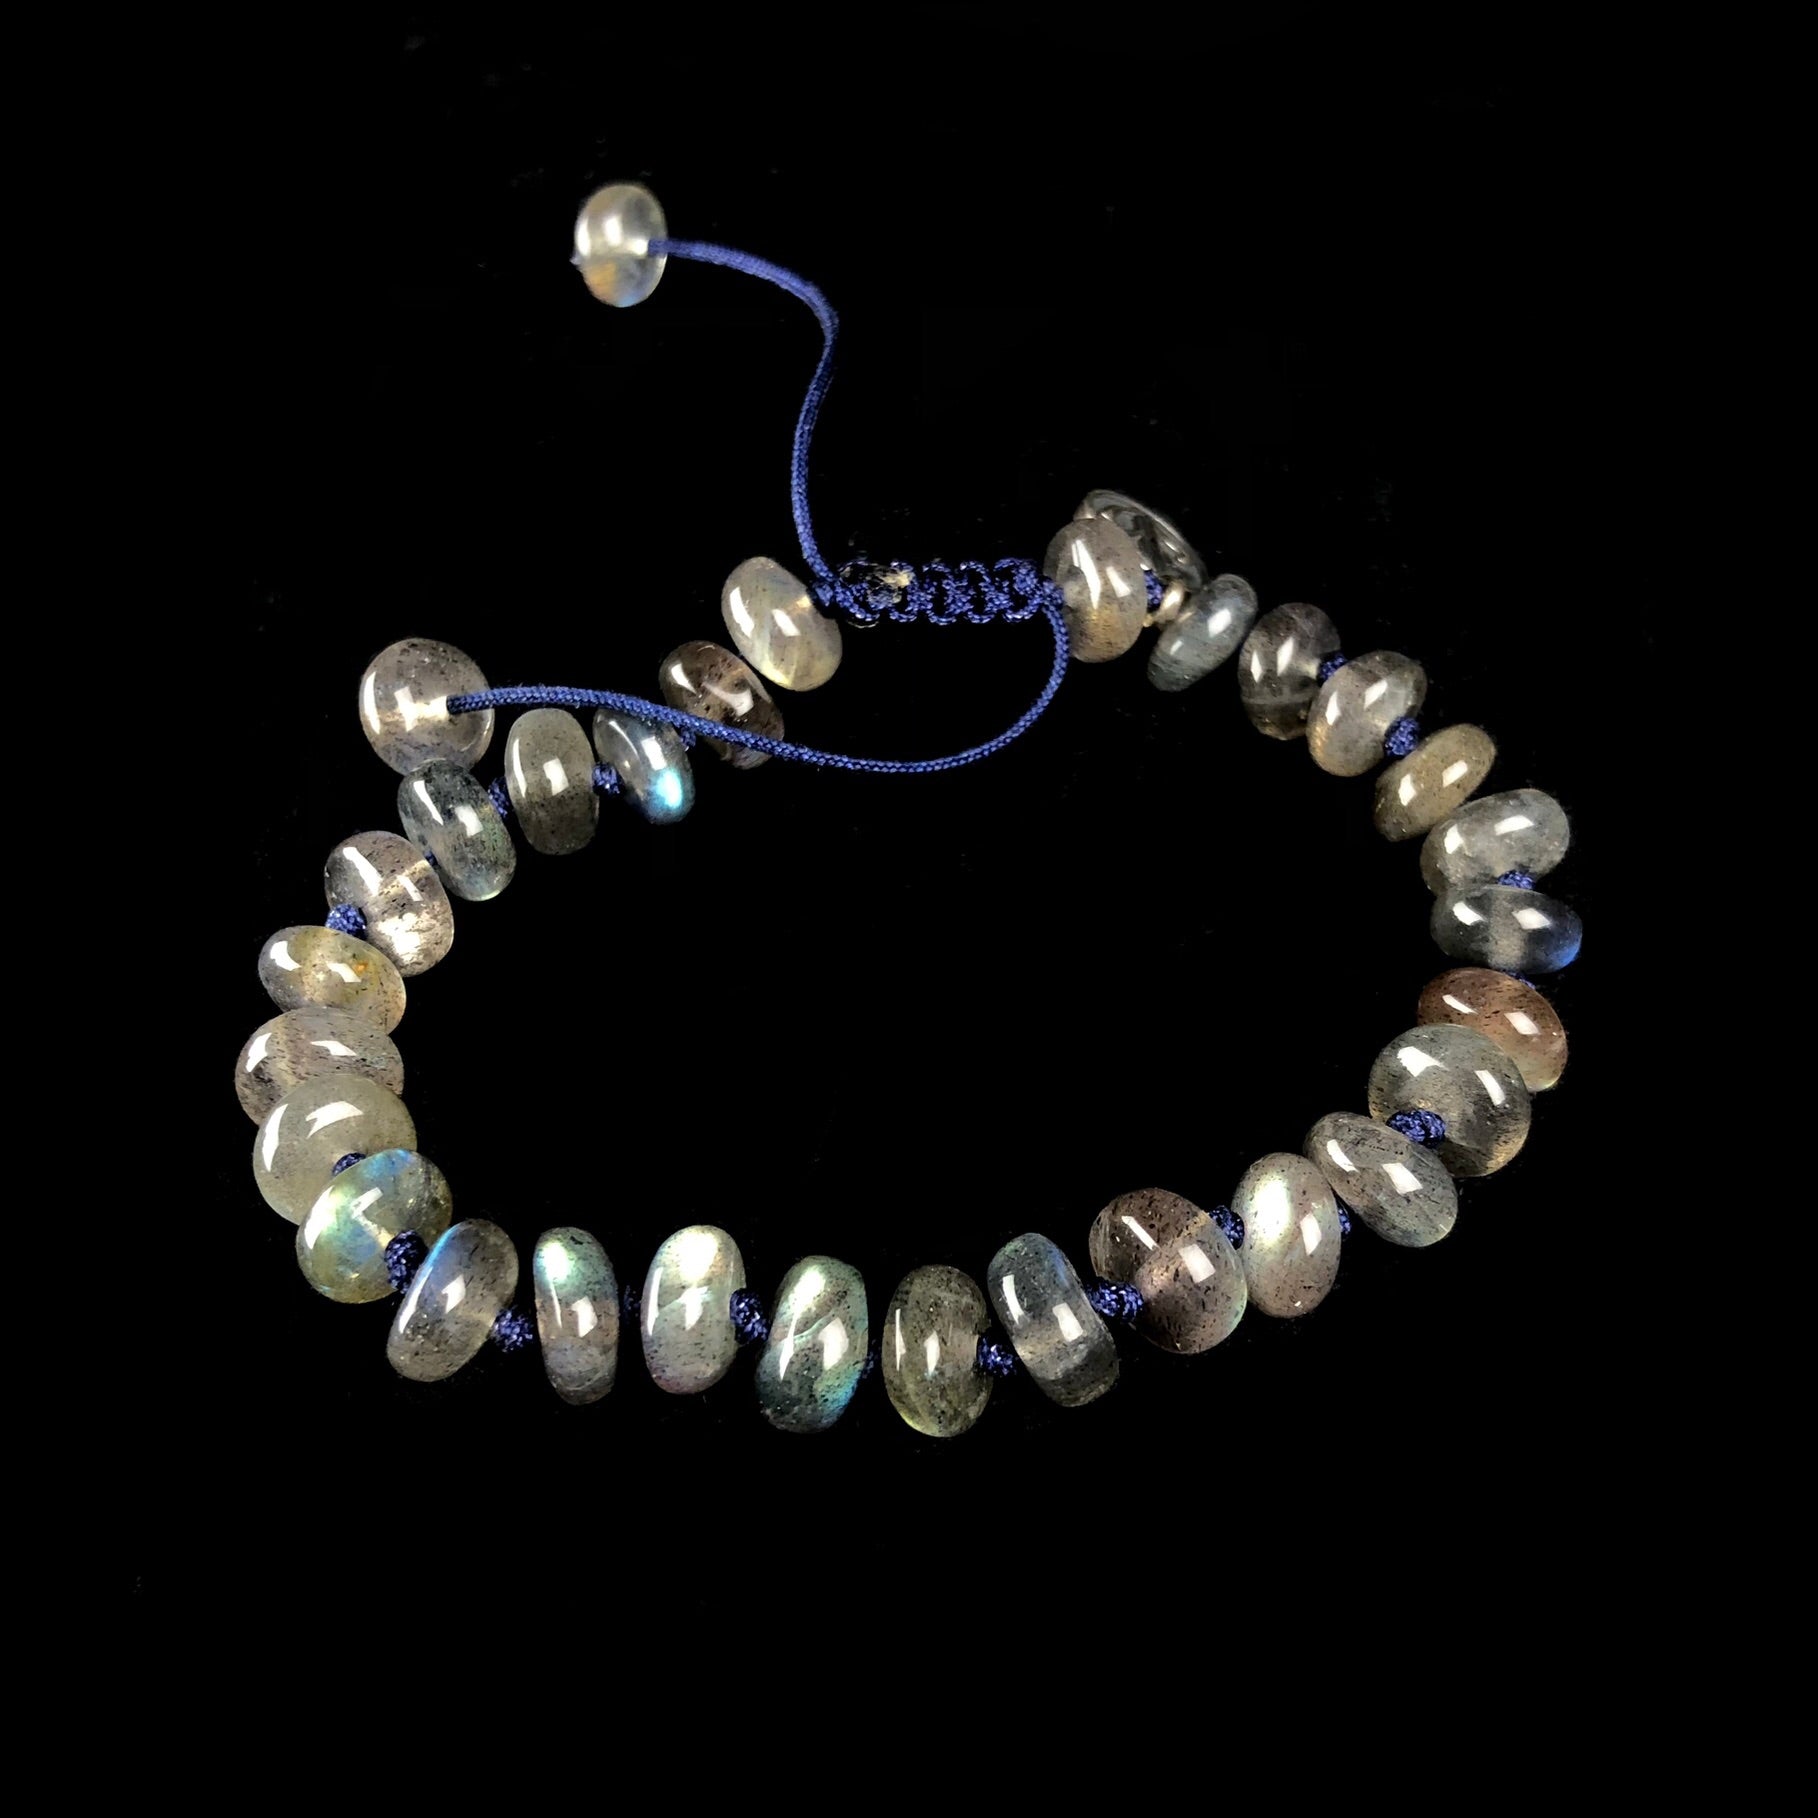 Translucent iridescent grey, blue and green colored stones on dark blue knotted cord